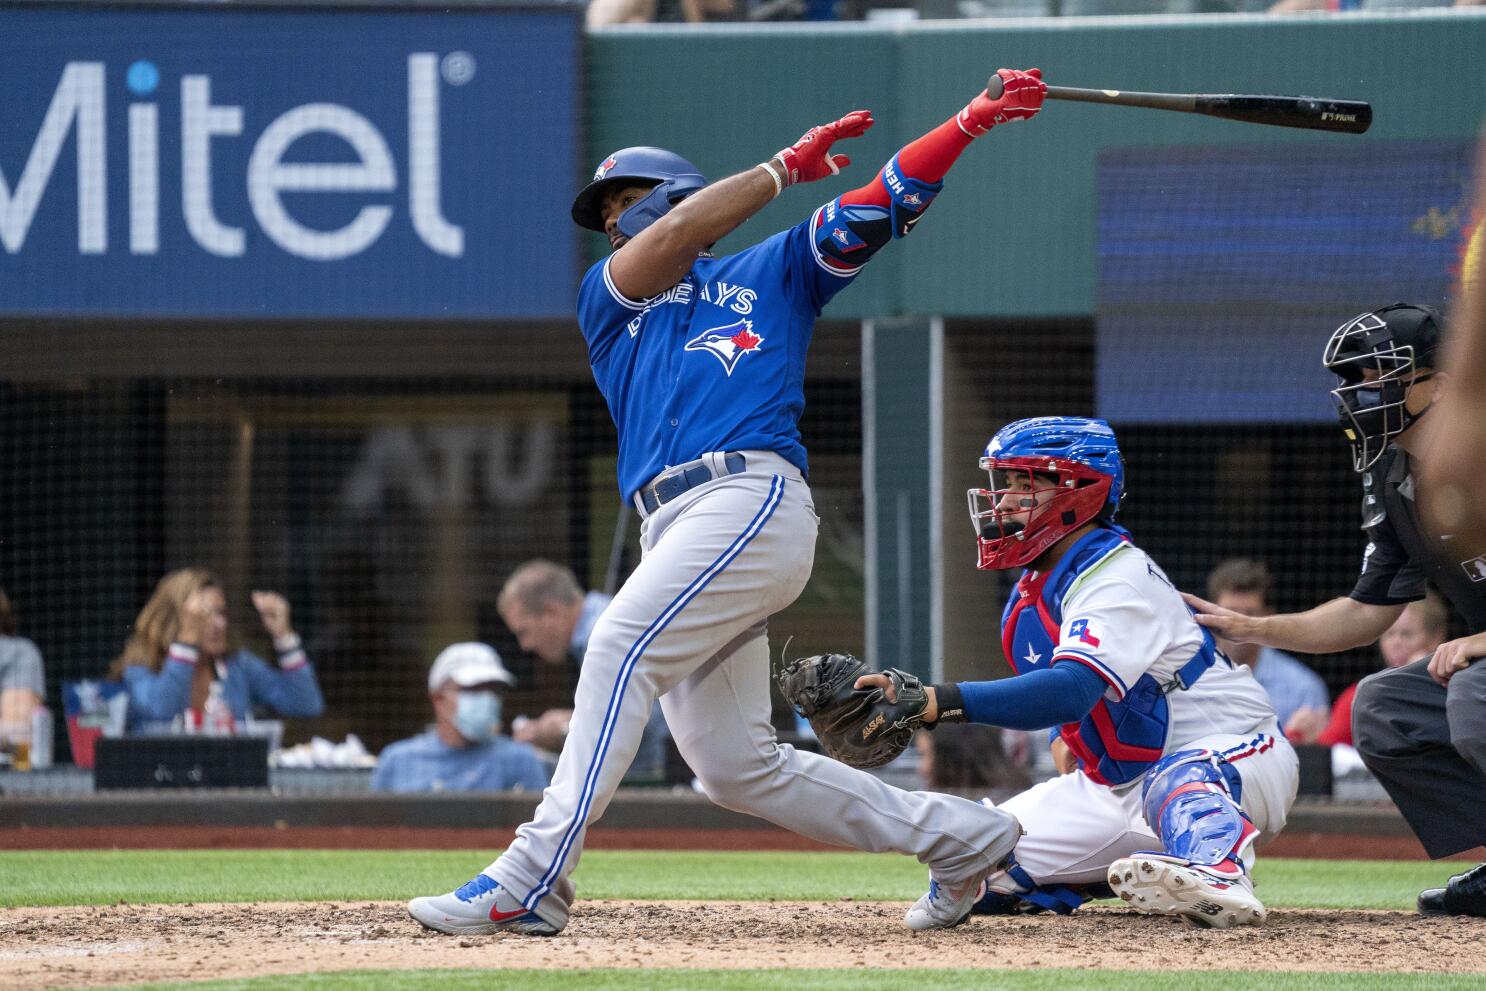 Blue Jays' Teoscar Hernández on IL after COVID close contact - The